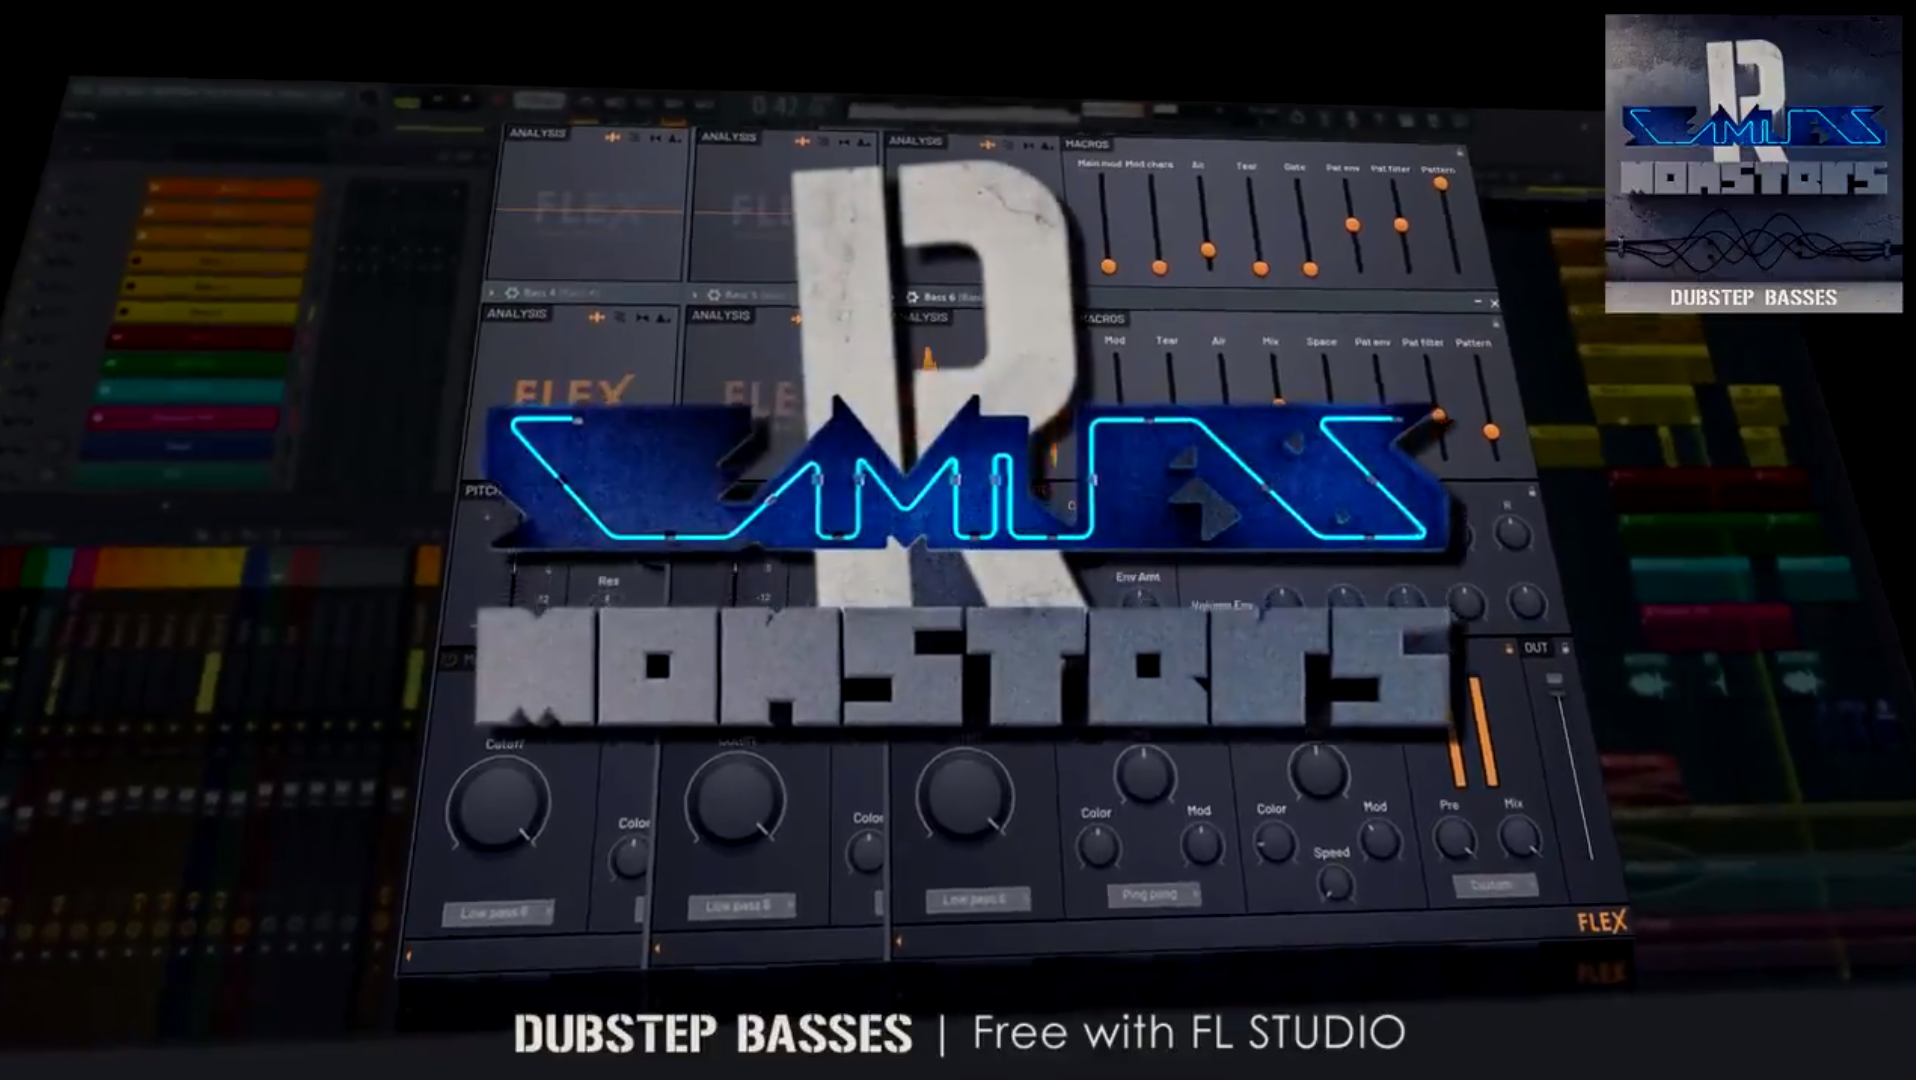 Get a free library of dubstep sounds from FL Studio